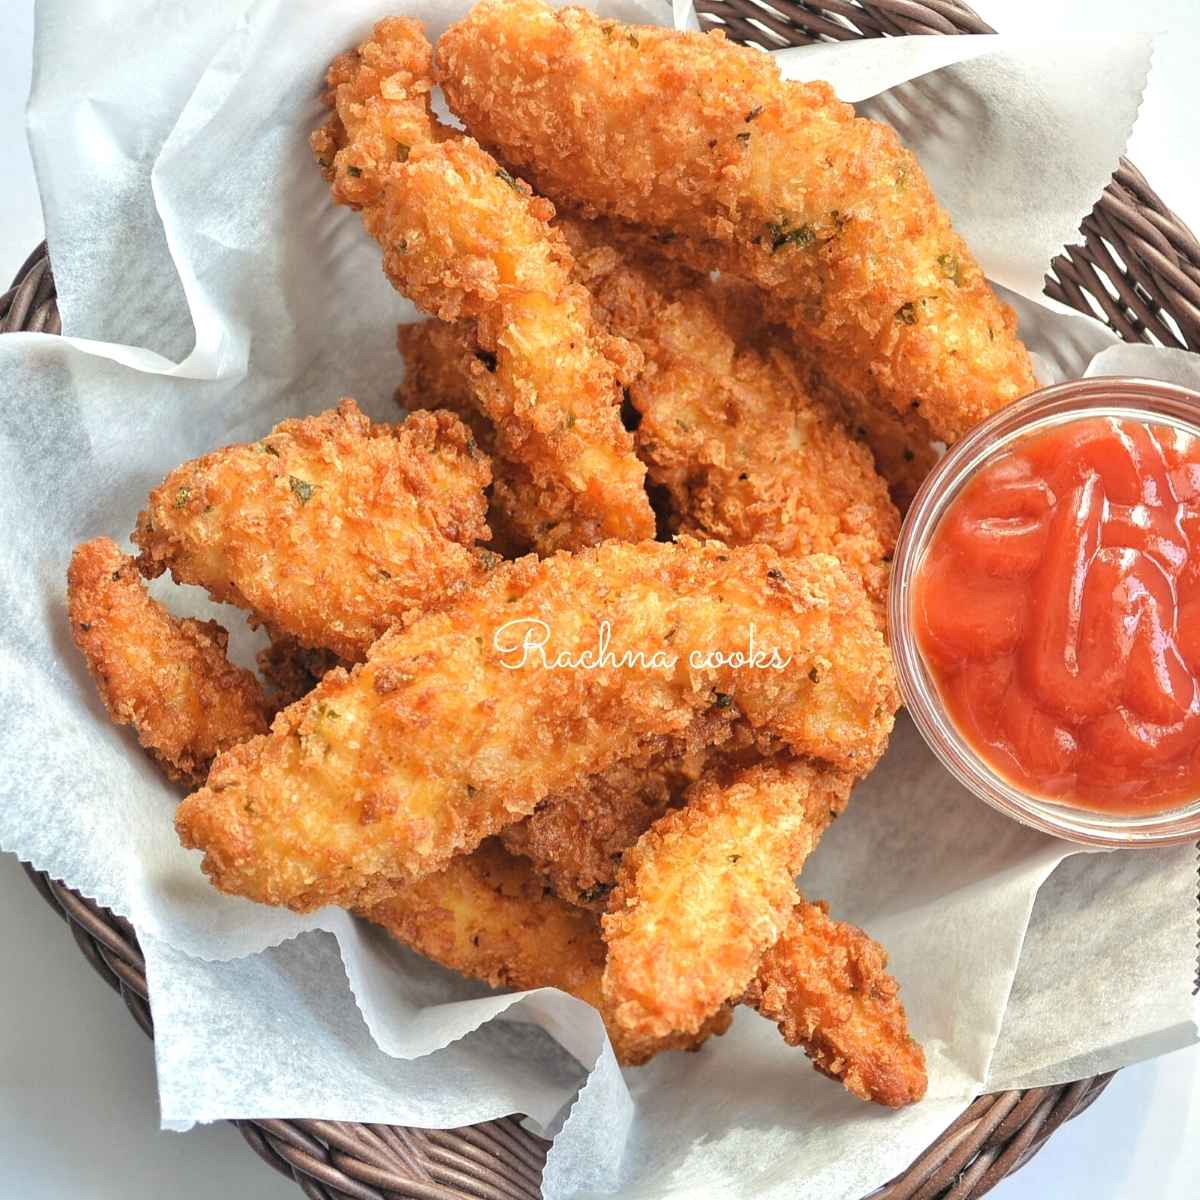 crunchy chicken tenders in a basket with a side of ketchup